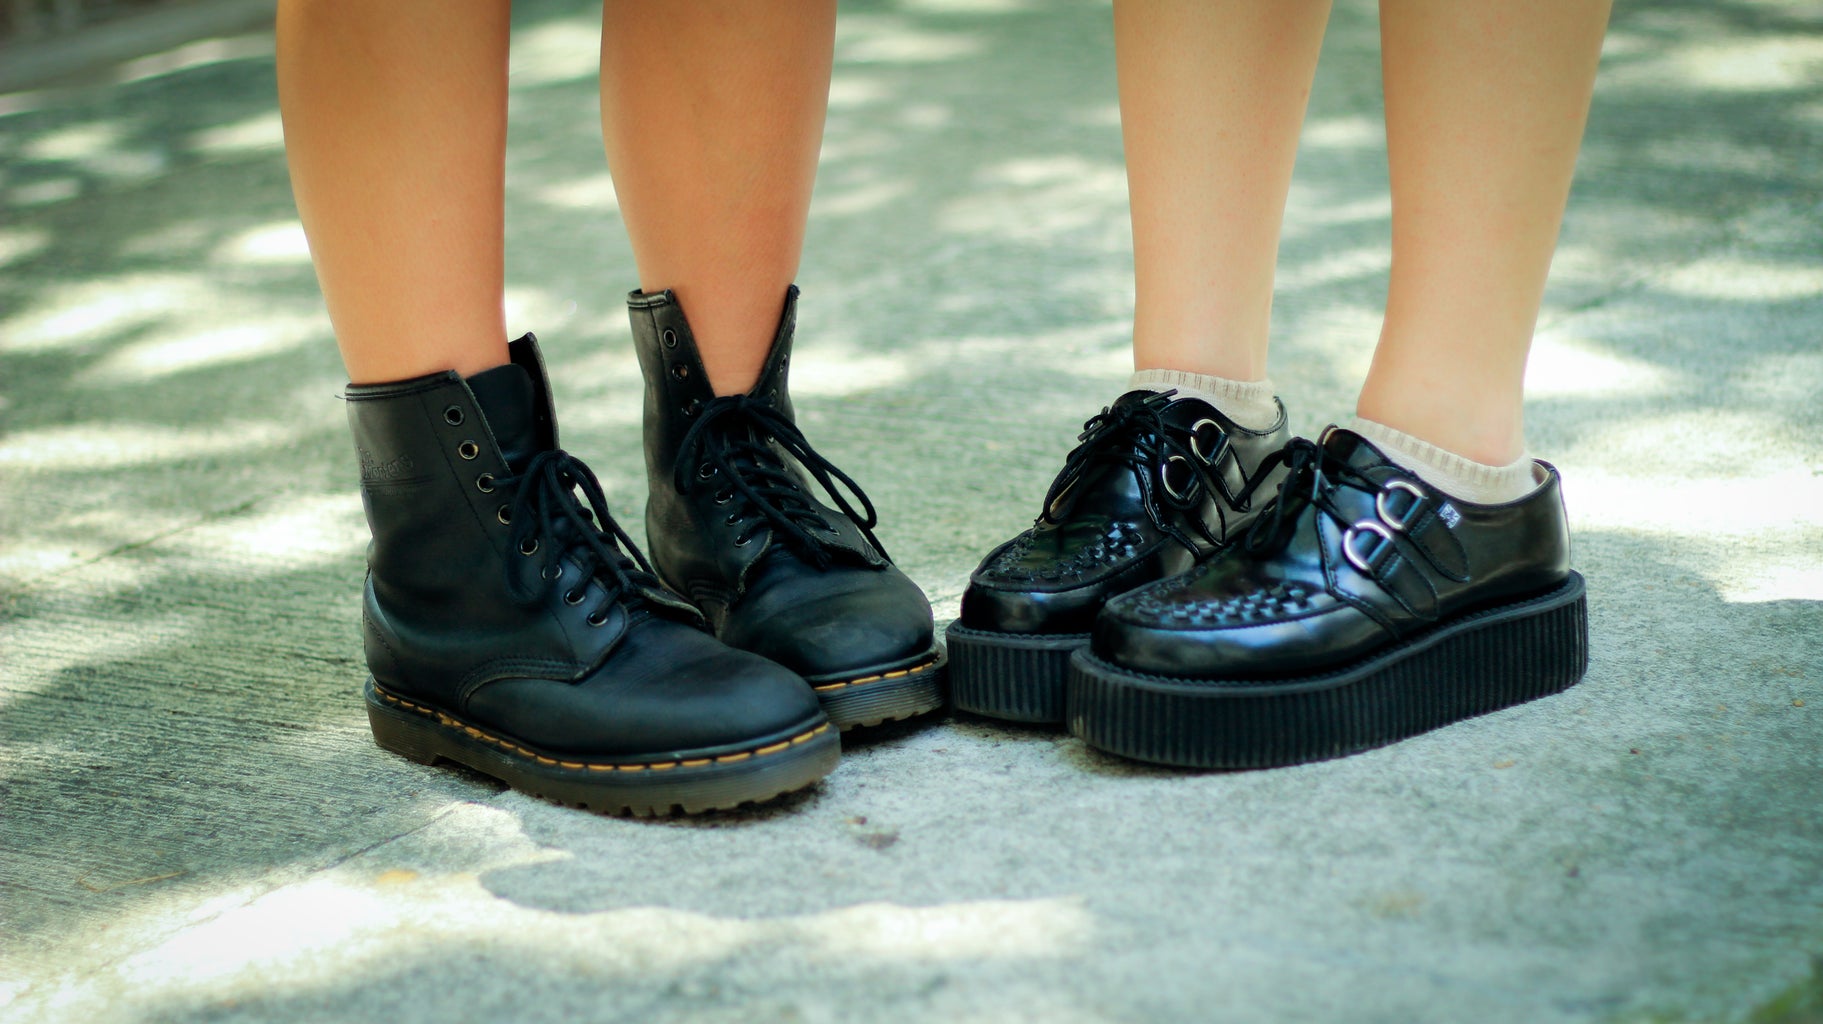 Two people standing next to each other with black shoes on. The pair of shoes on the left are boots.